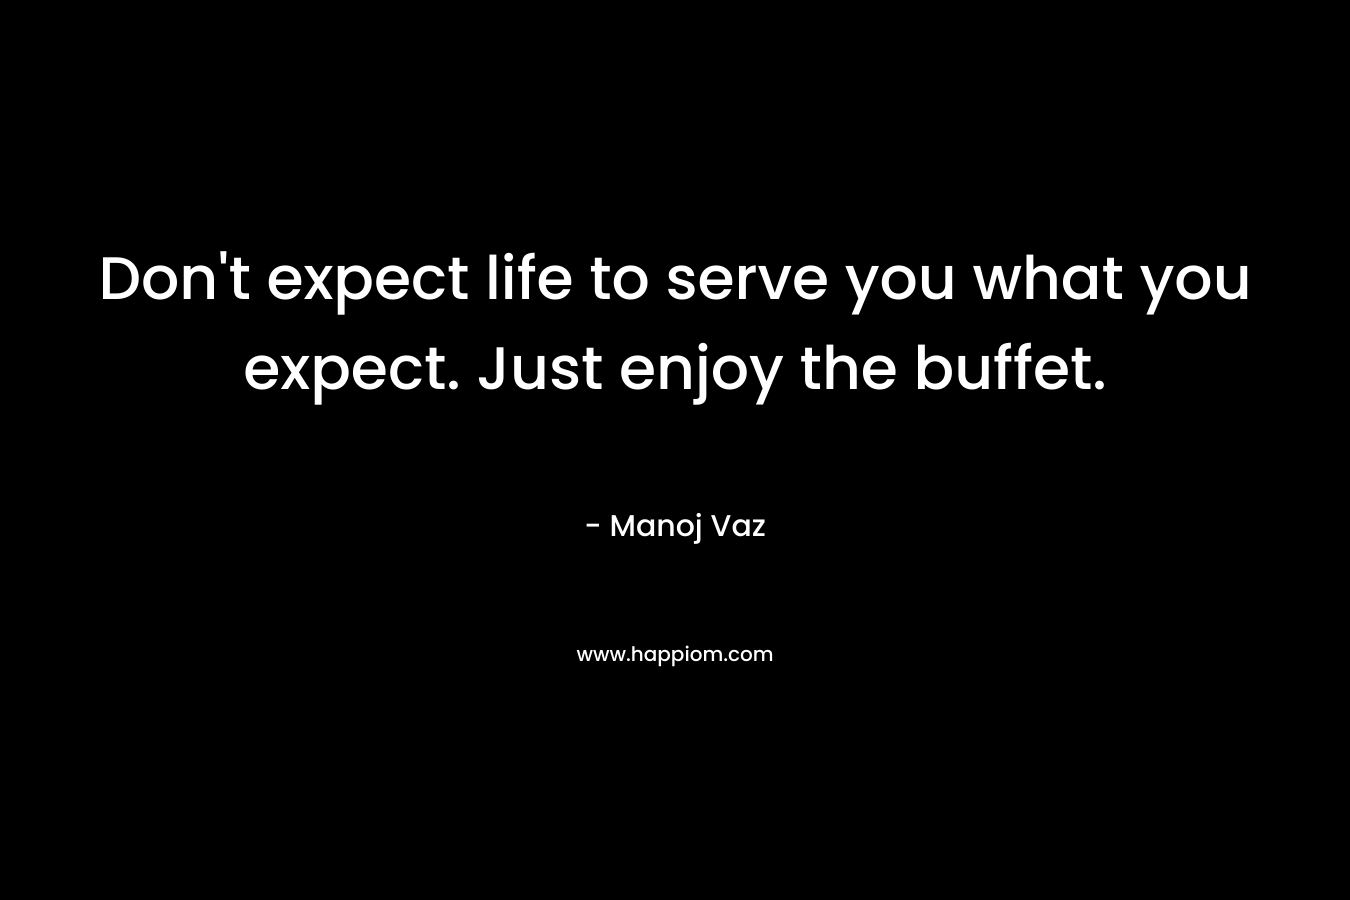 Don't expect life to serve you what you expect. Just enjoy the buffet.